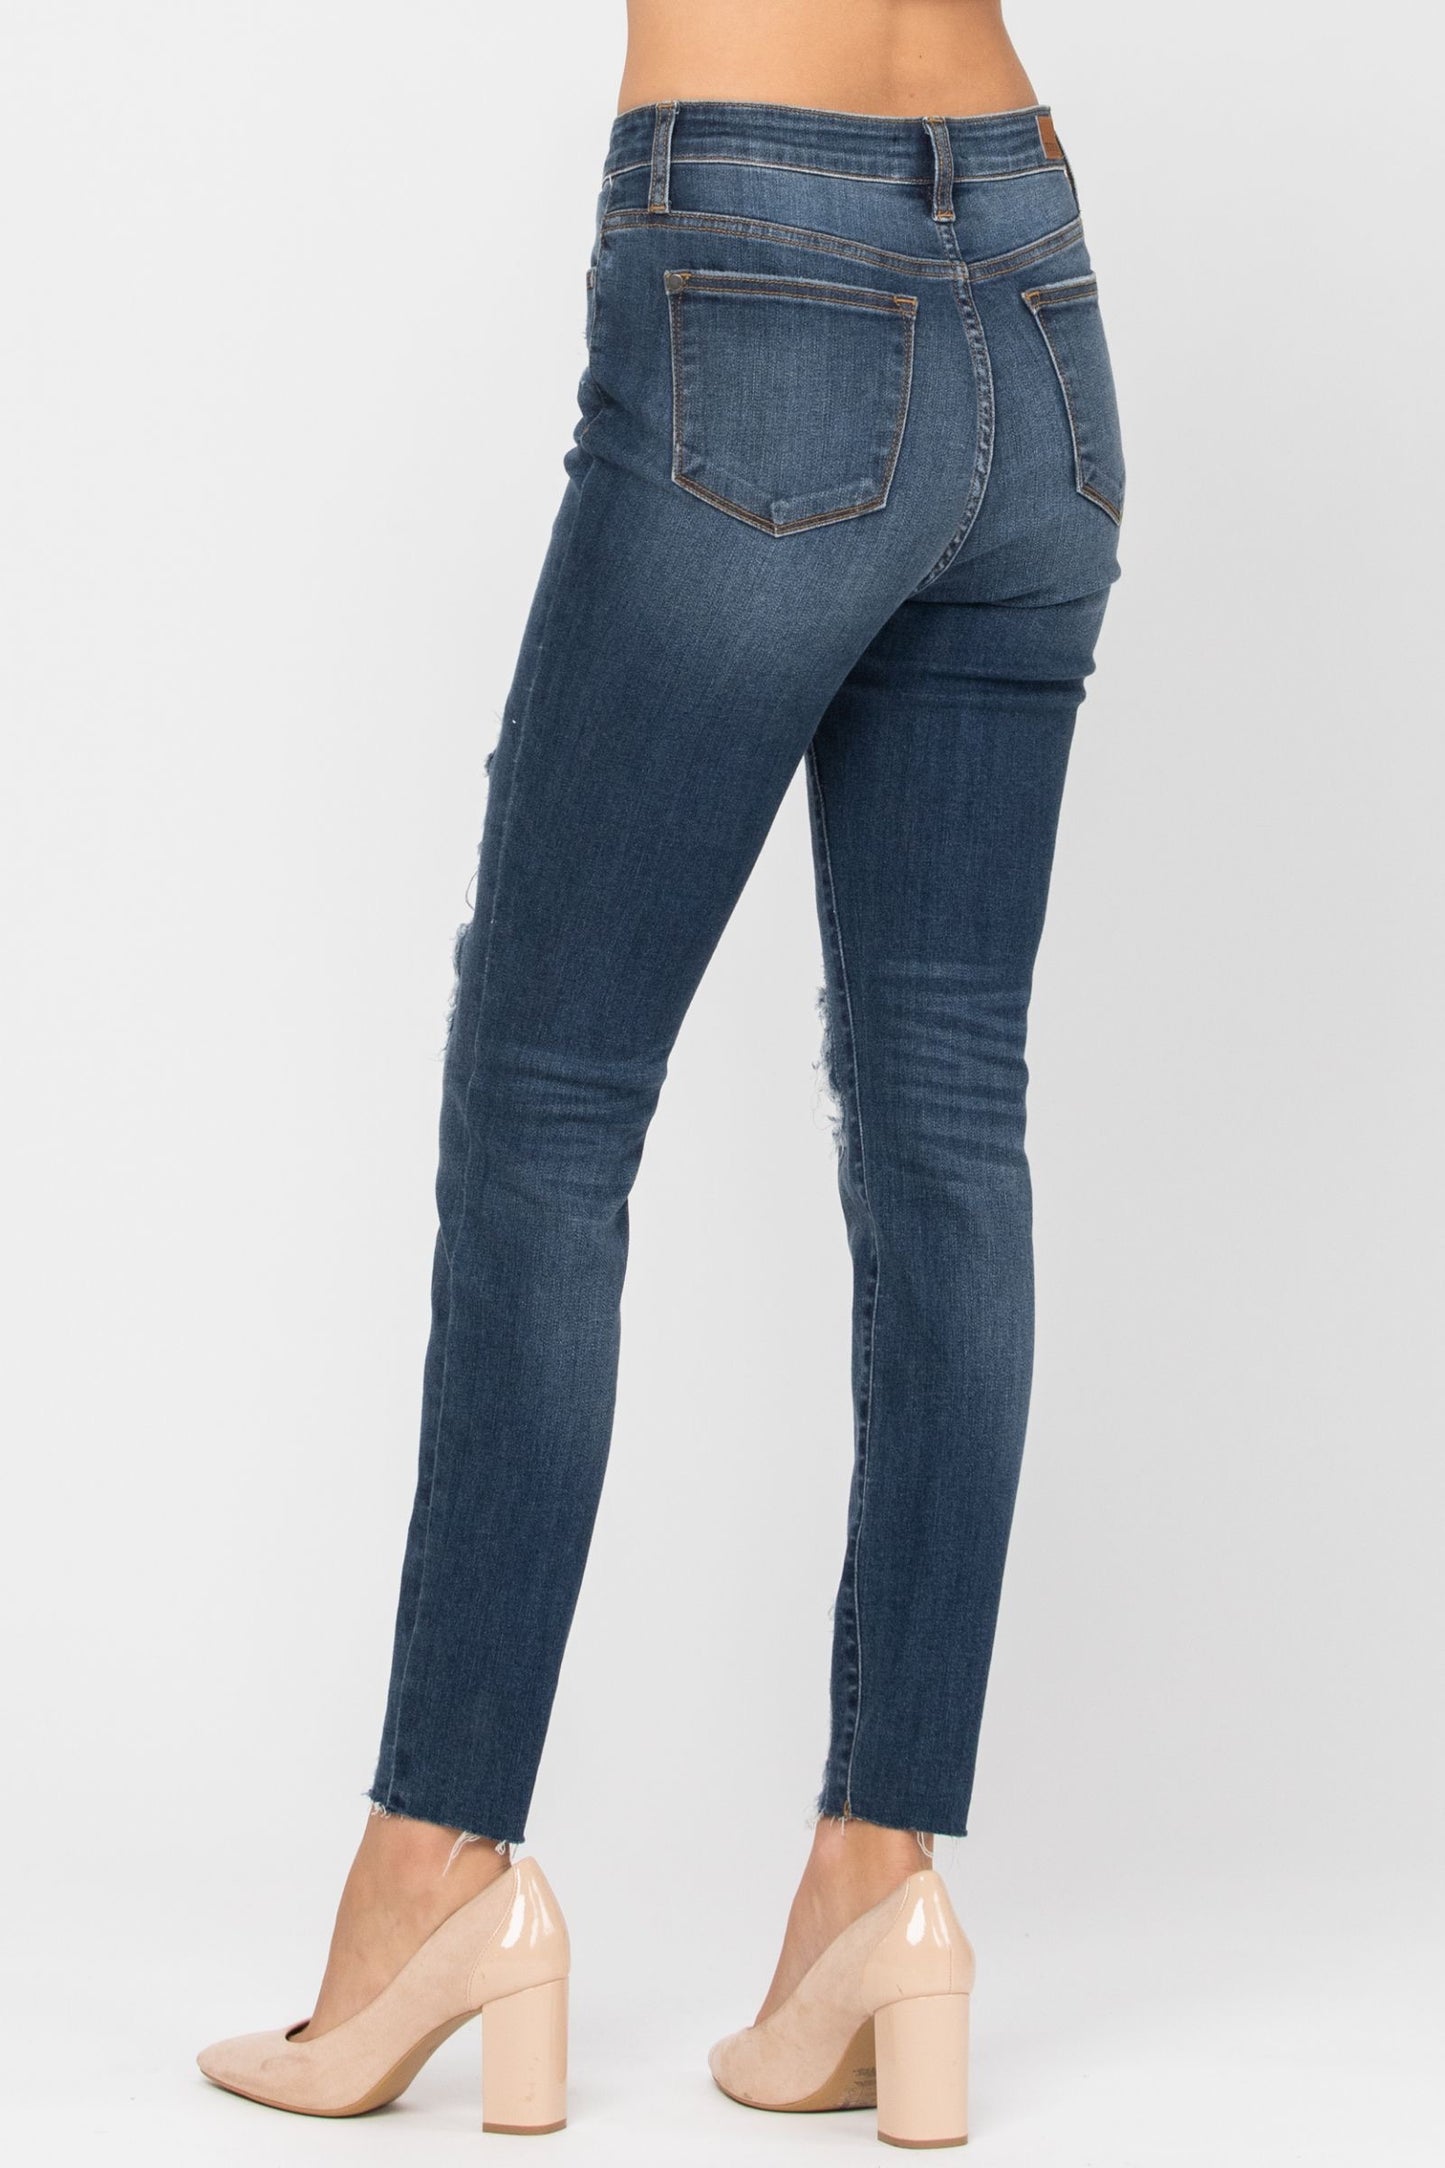 3 & 5 ONLY Judy Blue: Welcome to the Jungle - Leopard Patch Skinny Jeans